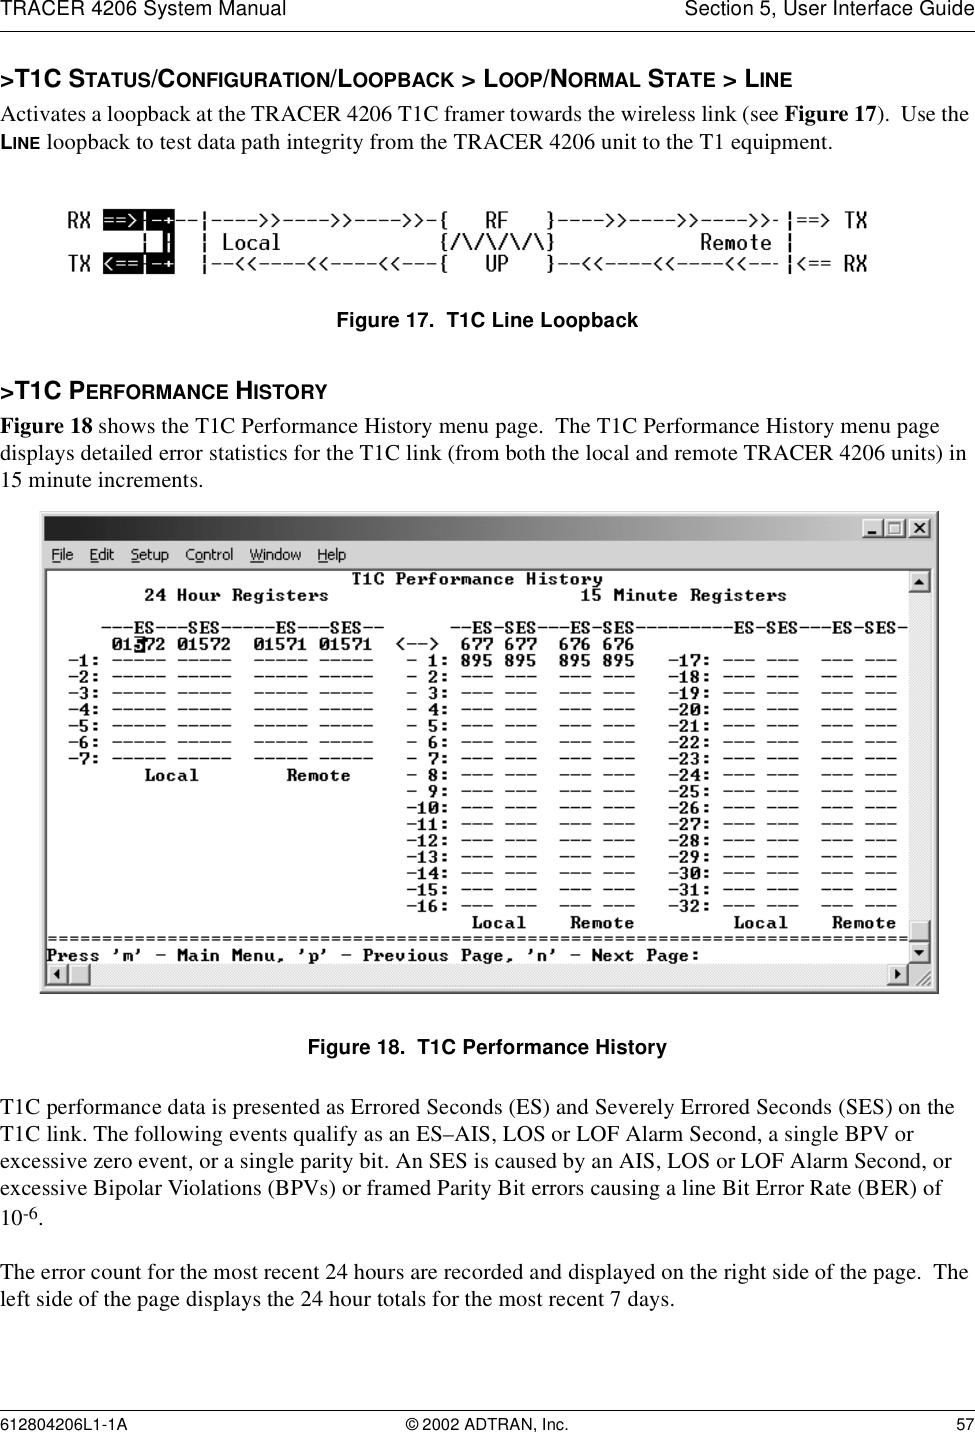 TRACER 4206 System Manual Section 5, User Interface Guide612804206L1-1A © 2002 ADTRAN, Inc. 57&gt;T1C STATUS/CONFIGURATION/LOOPBACK &gt; LOOP/NORMAL STATE &gt; LINEActivates a loopback at the TRACER 4206 T1C framer towards the wireless link (see Figure 17).  Use the LINE loopback to test data path integrity from the TRACER 4206 unit to the T1 equipment.Figure 17.  T1C Line Loopback&gt;T1C PERFORMANCE HISTORYFigure 18 shows the T1C Performance History menu page.  The T1C Performance History menu page displays detailed error statistics for the T1C link (from both the local and remote TRACER 4206 units) in 15 minute increments.Figure 18.  T1C Performance HistoryT1C performance data is presented as Errored Seconds (ES) and Severely Errored Seconds (SES) on the T1C link. The following events qualify as an ES–AIS, LOS or LOF Alarm Second, a single BPV or excessive zero event, or a single parity bit. An SES is caused by an AIS, LOS or LOF Alarm Second, or excessive Bipolar Violations (BPVs) or framed Parity Bit errors causing a line Bit Error Rate (BER) of 10-6.The error count for the most recent 24 hours are recorded and displayed on the right side of the page.  The left side of the page displays the 24 hour totals for the most recent 7 days.